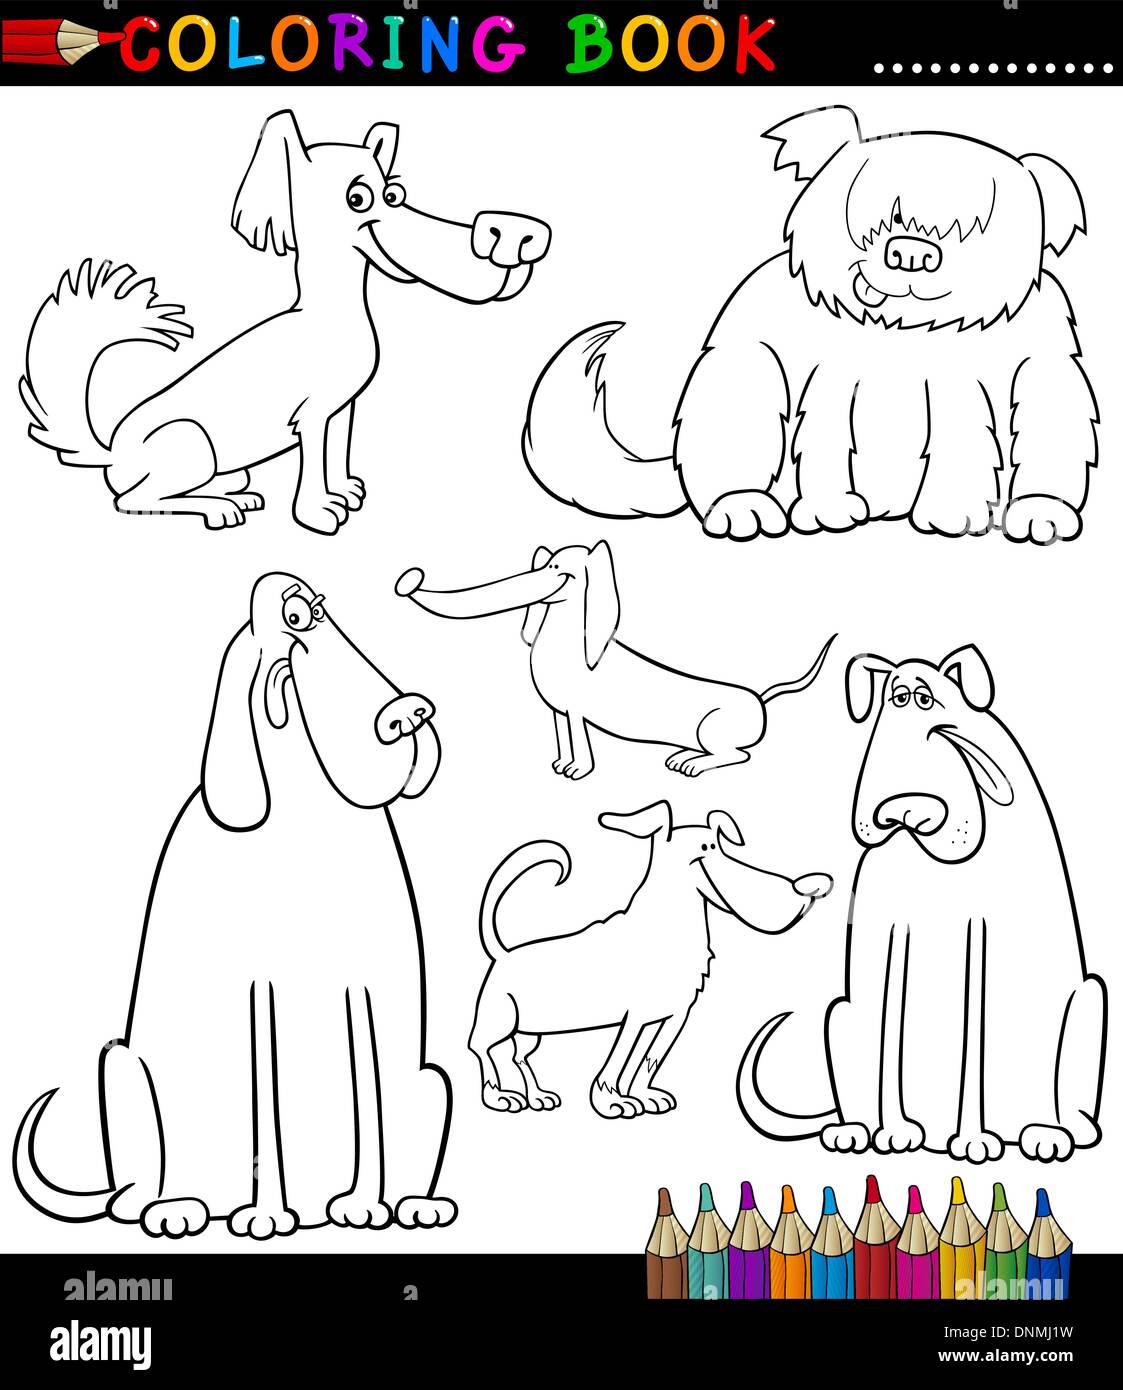 Coloring Book or Coloring Page Black and White Cartoon Illustration of Funny Purebred or Mongrel Dogs and Puppies Stock Vector